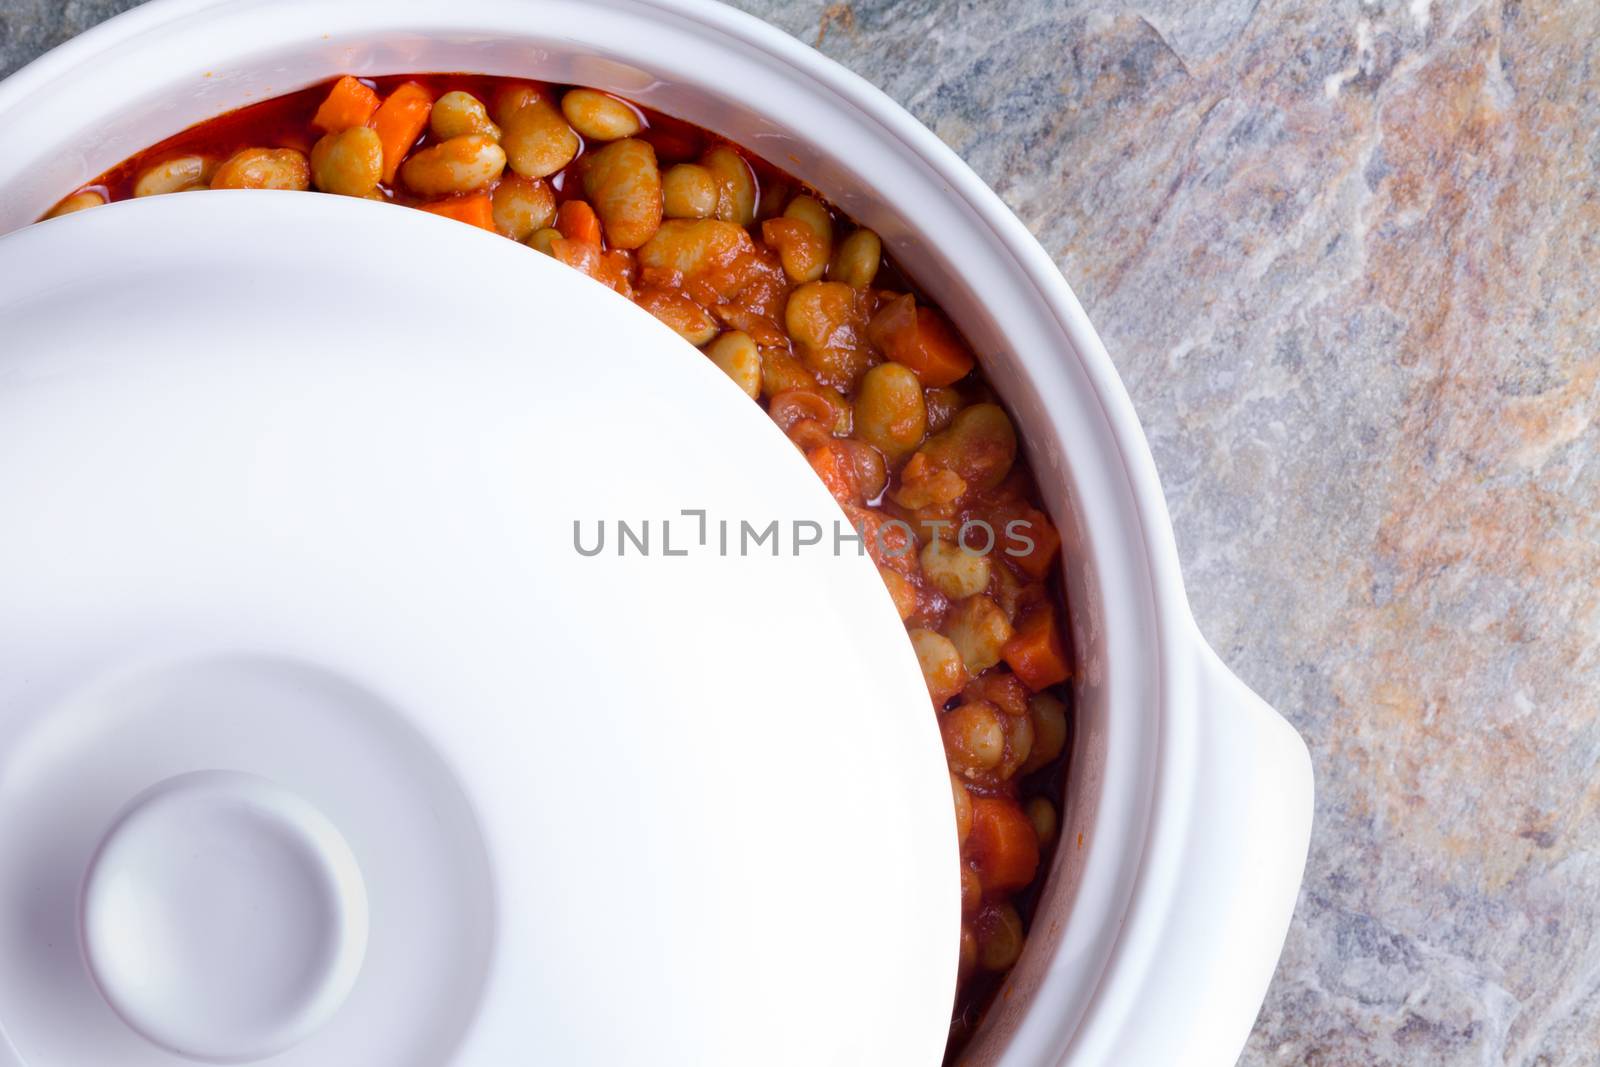 Delicious savory lima bean casserole with carrots cooling off in a white ceramic casserole dish with the lid moved aside to view the contents, closeup overhead view on a stone counter